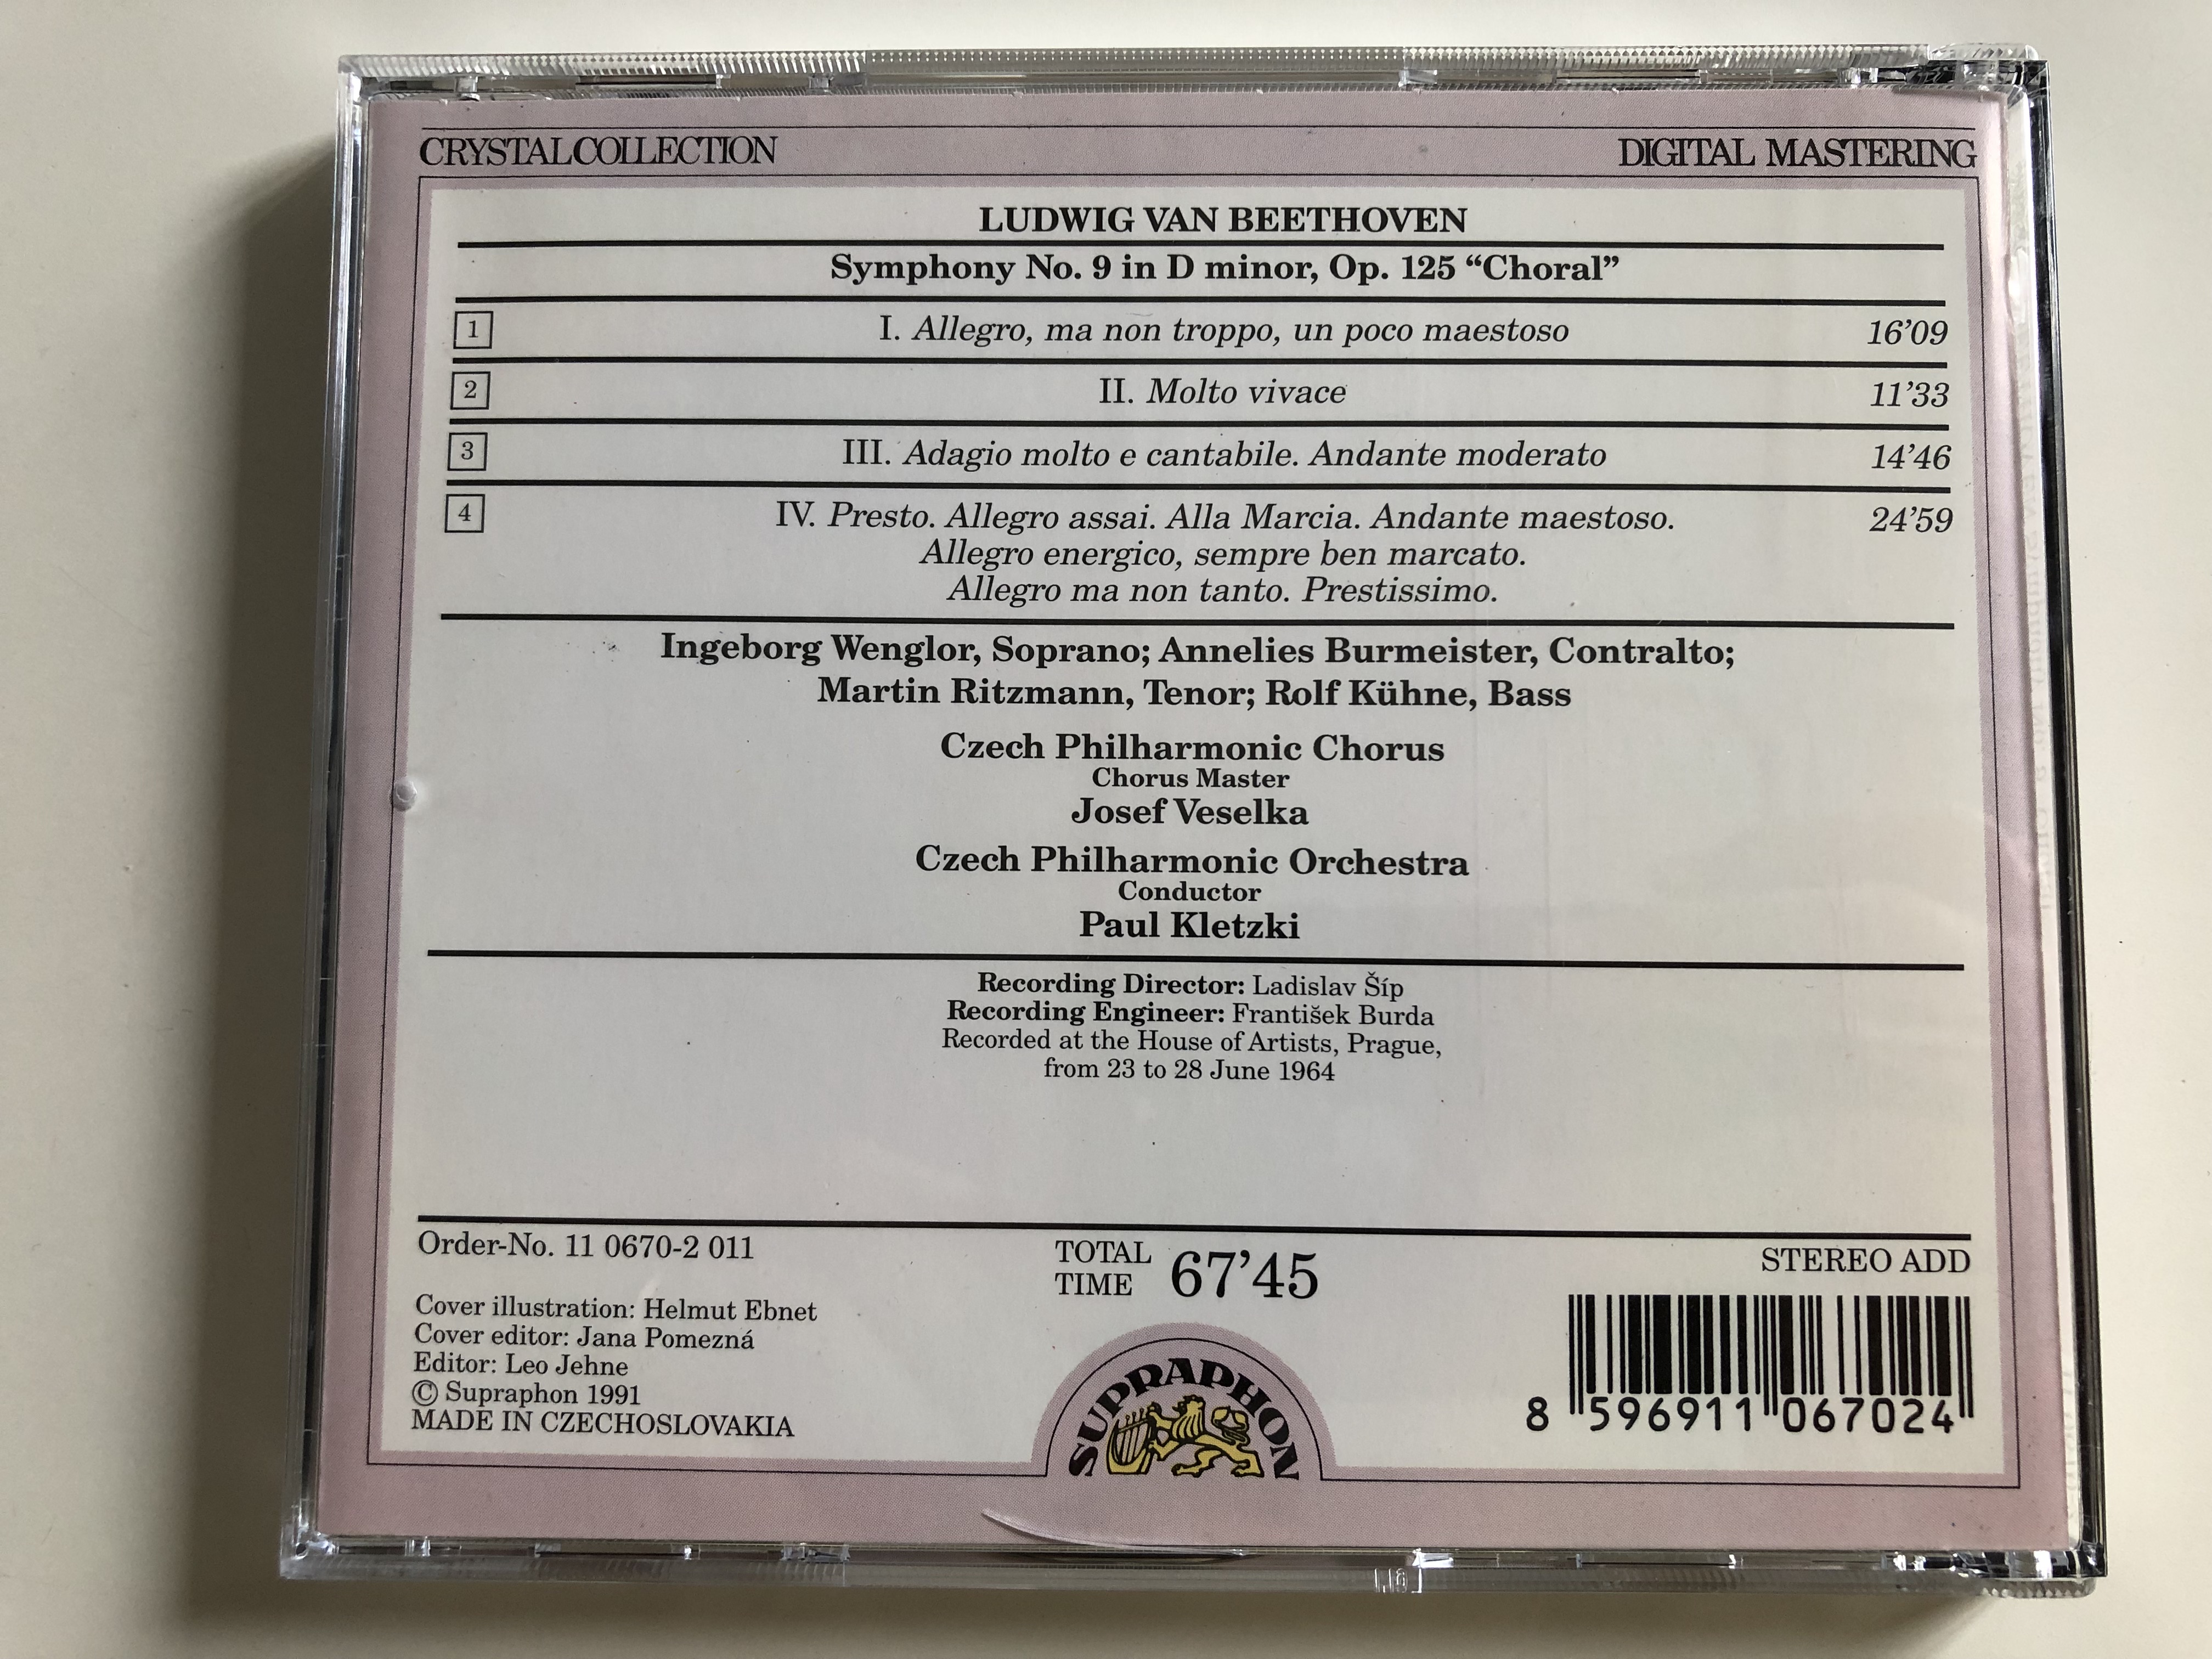 beethoven-symphony-no.-9-choral-soloists-czech-philharmonic-chorus-and-orchestra-conducted-by-paul-kletzki-crystal-colletion-supraphon-audio-cd-1991-7-.jpg